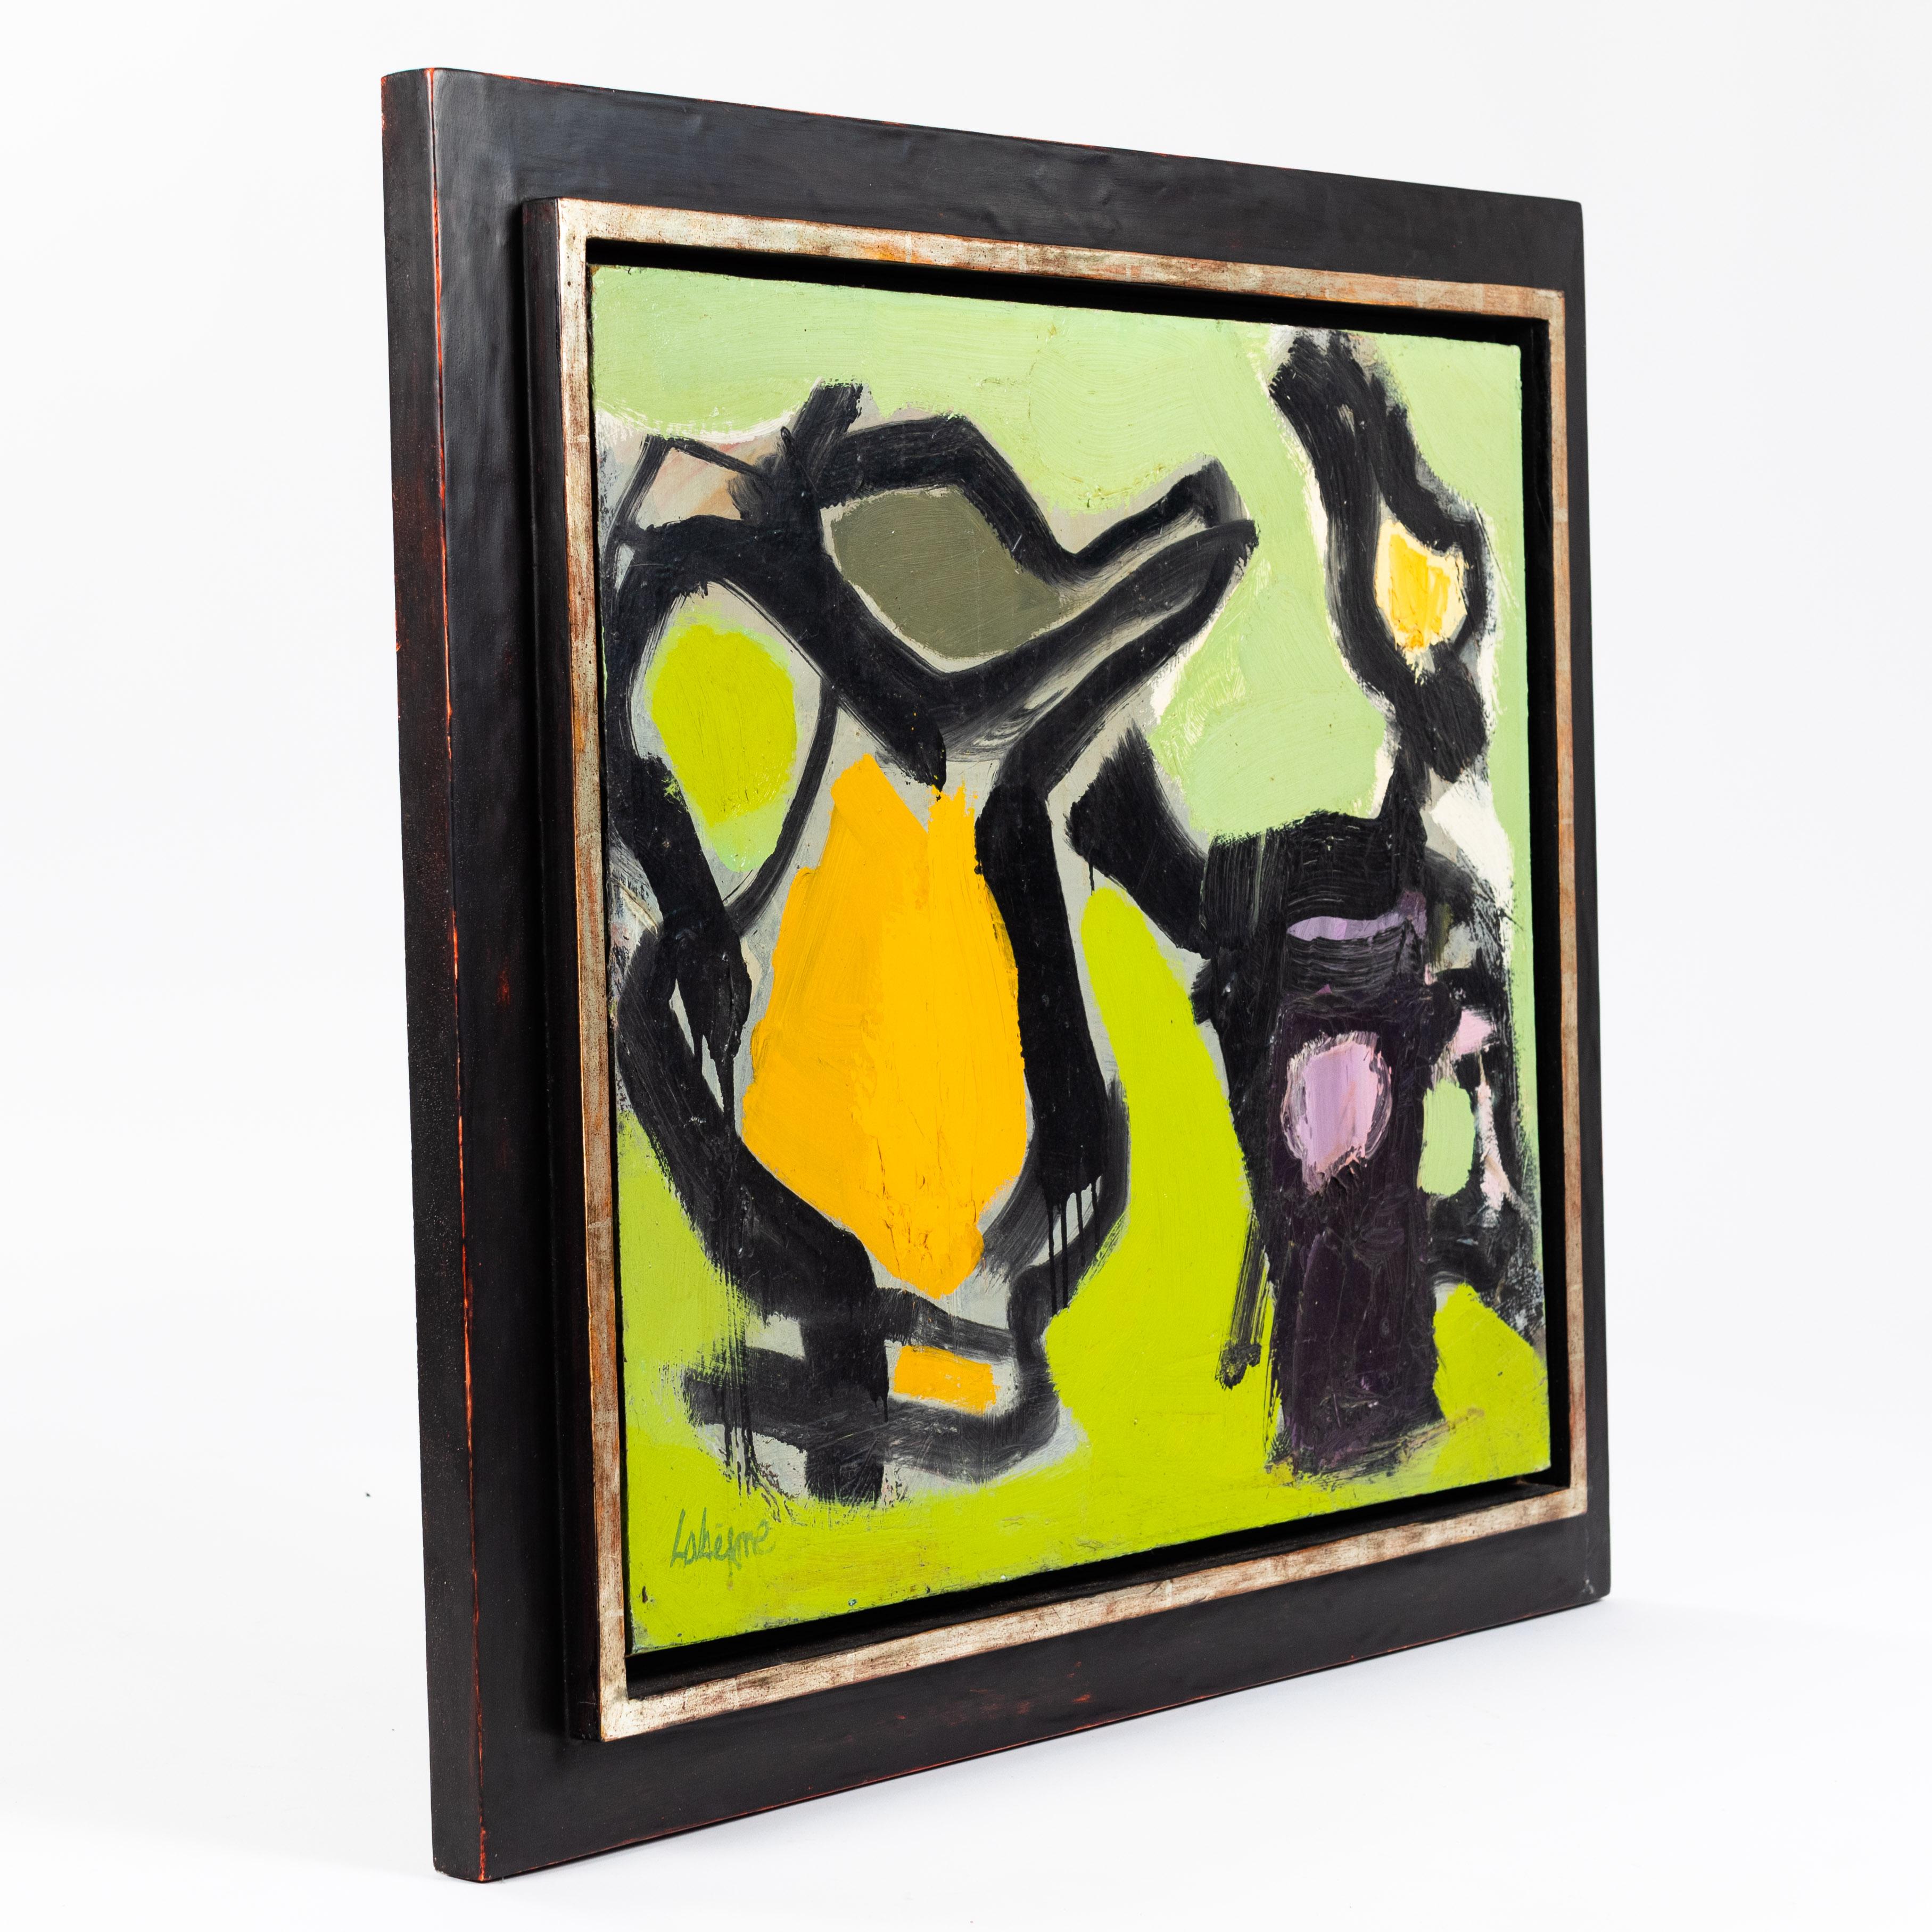 Abstract painting in green-black-orange colors by Serge Labégorre - professionally framed
Passionate still life designed with thick brush strokes of acrylic paint that appears even more plastic and vivid due to the black framing of the